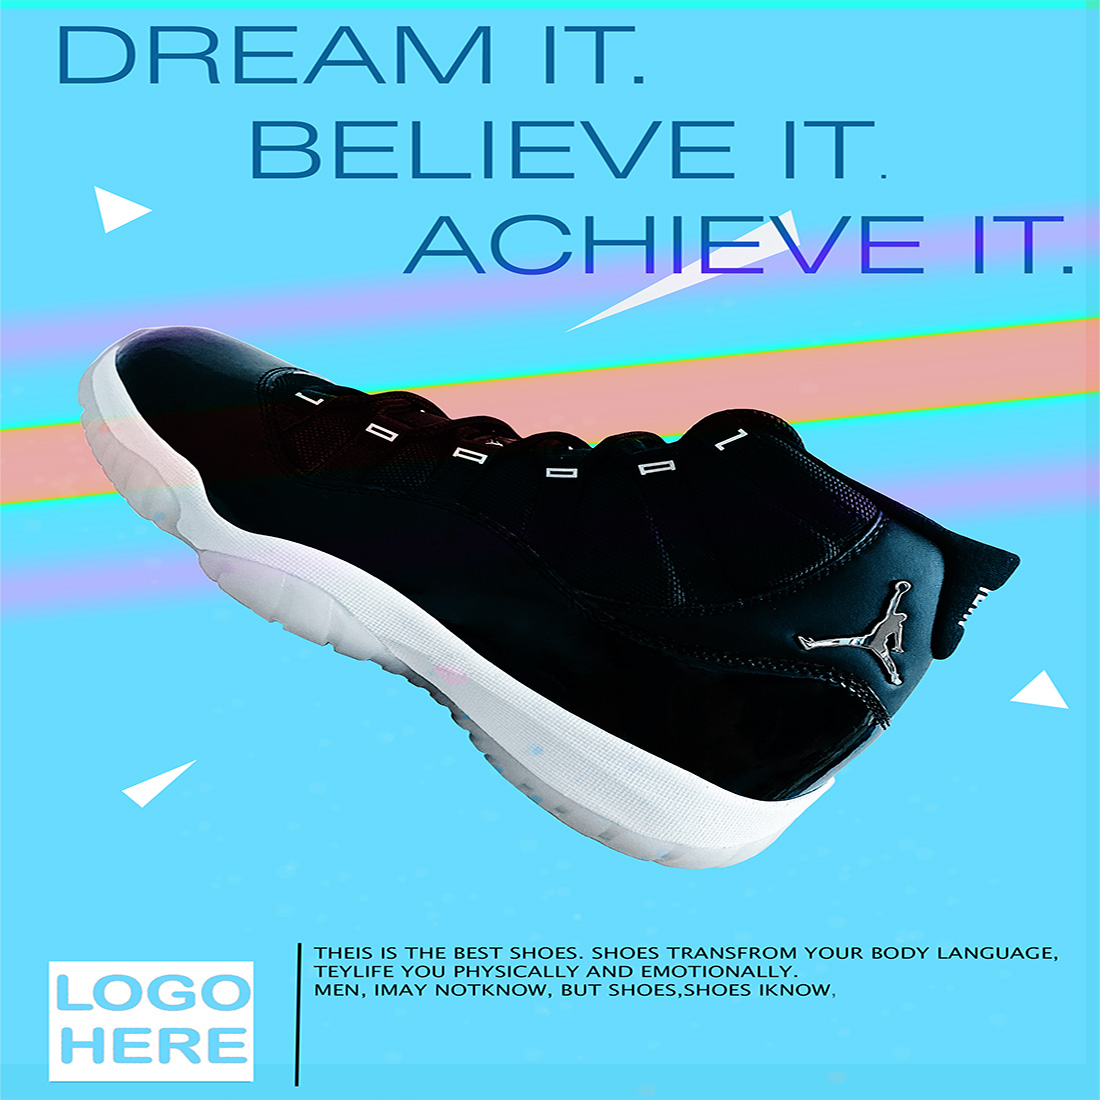 Fashion sports shoes social media post cover image.